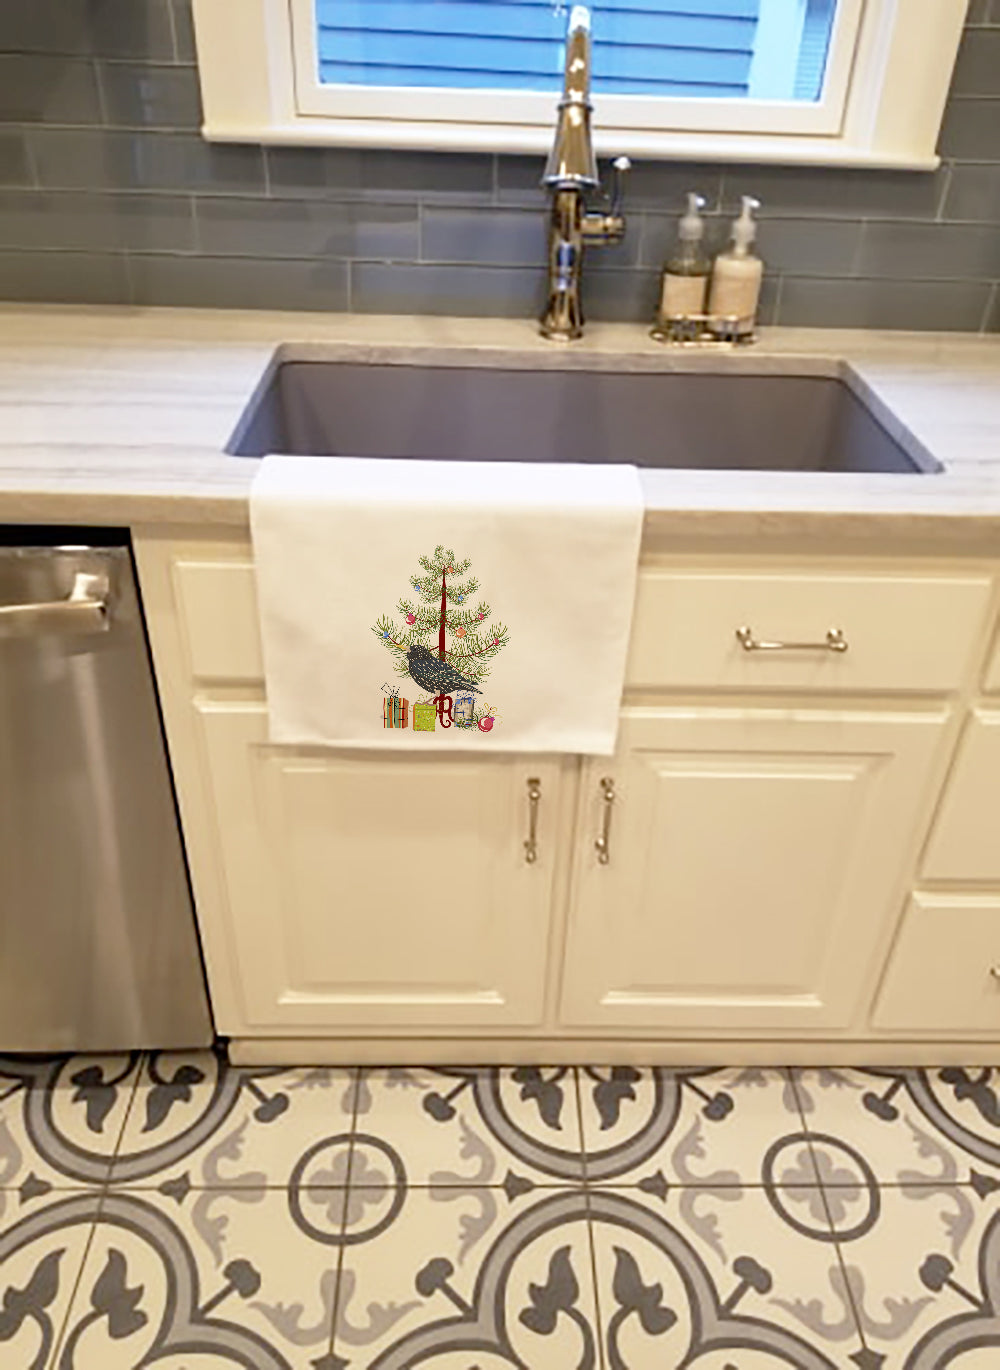 Buy this Starling Merry Christmas White Kitchen Towel Set of 2